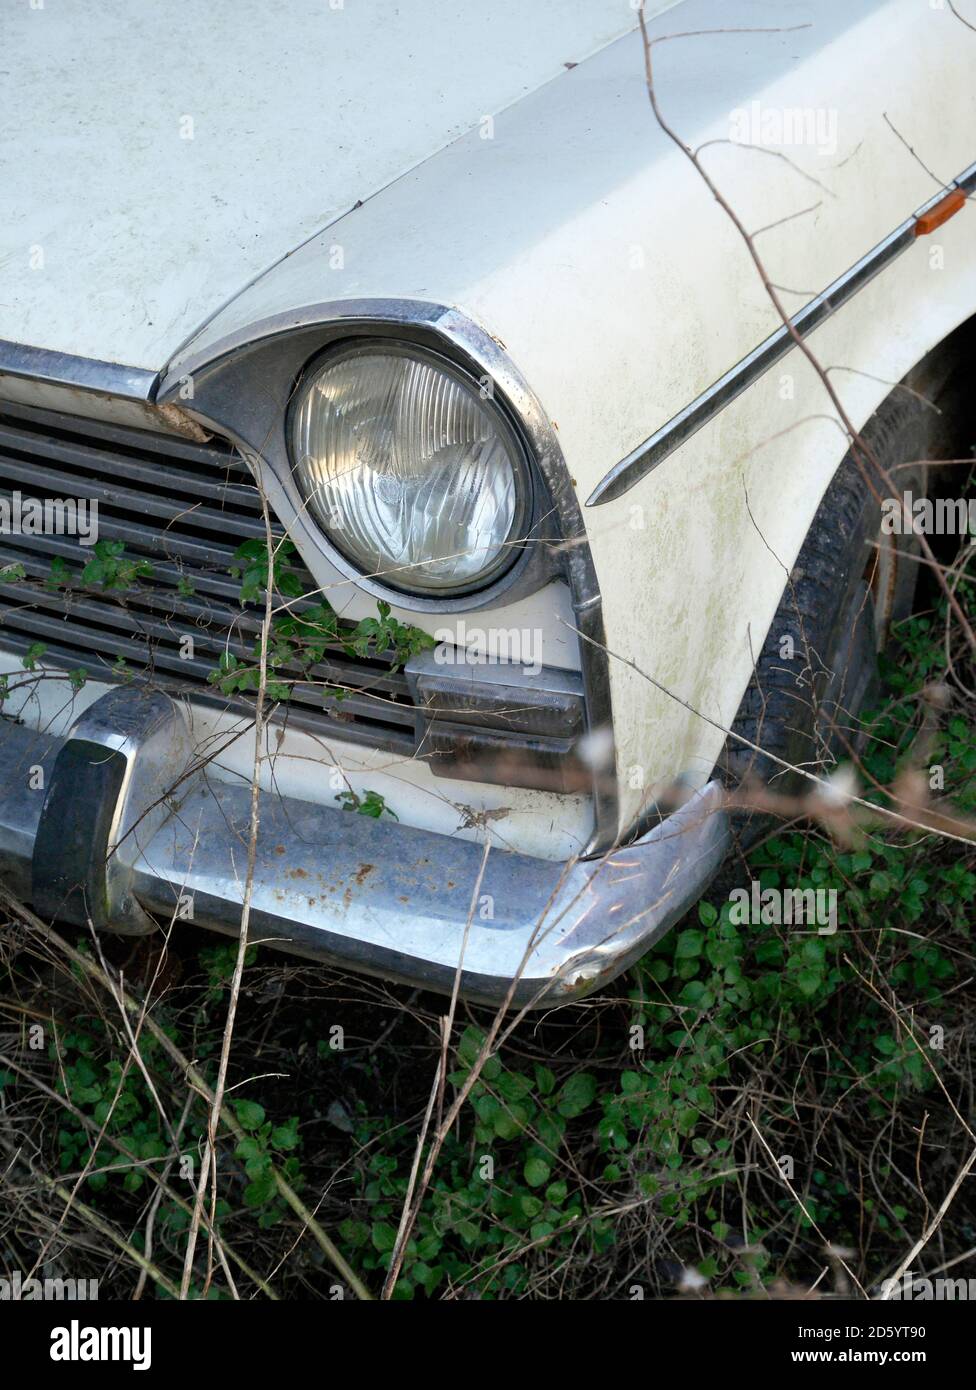 Headlight and car wing of vintage car out of order Stock Photo